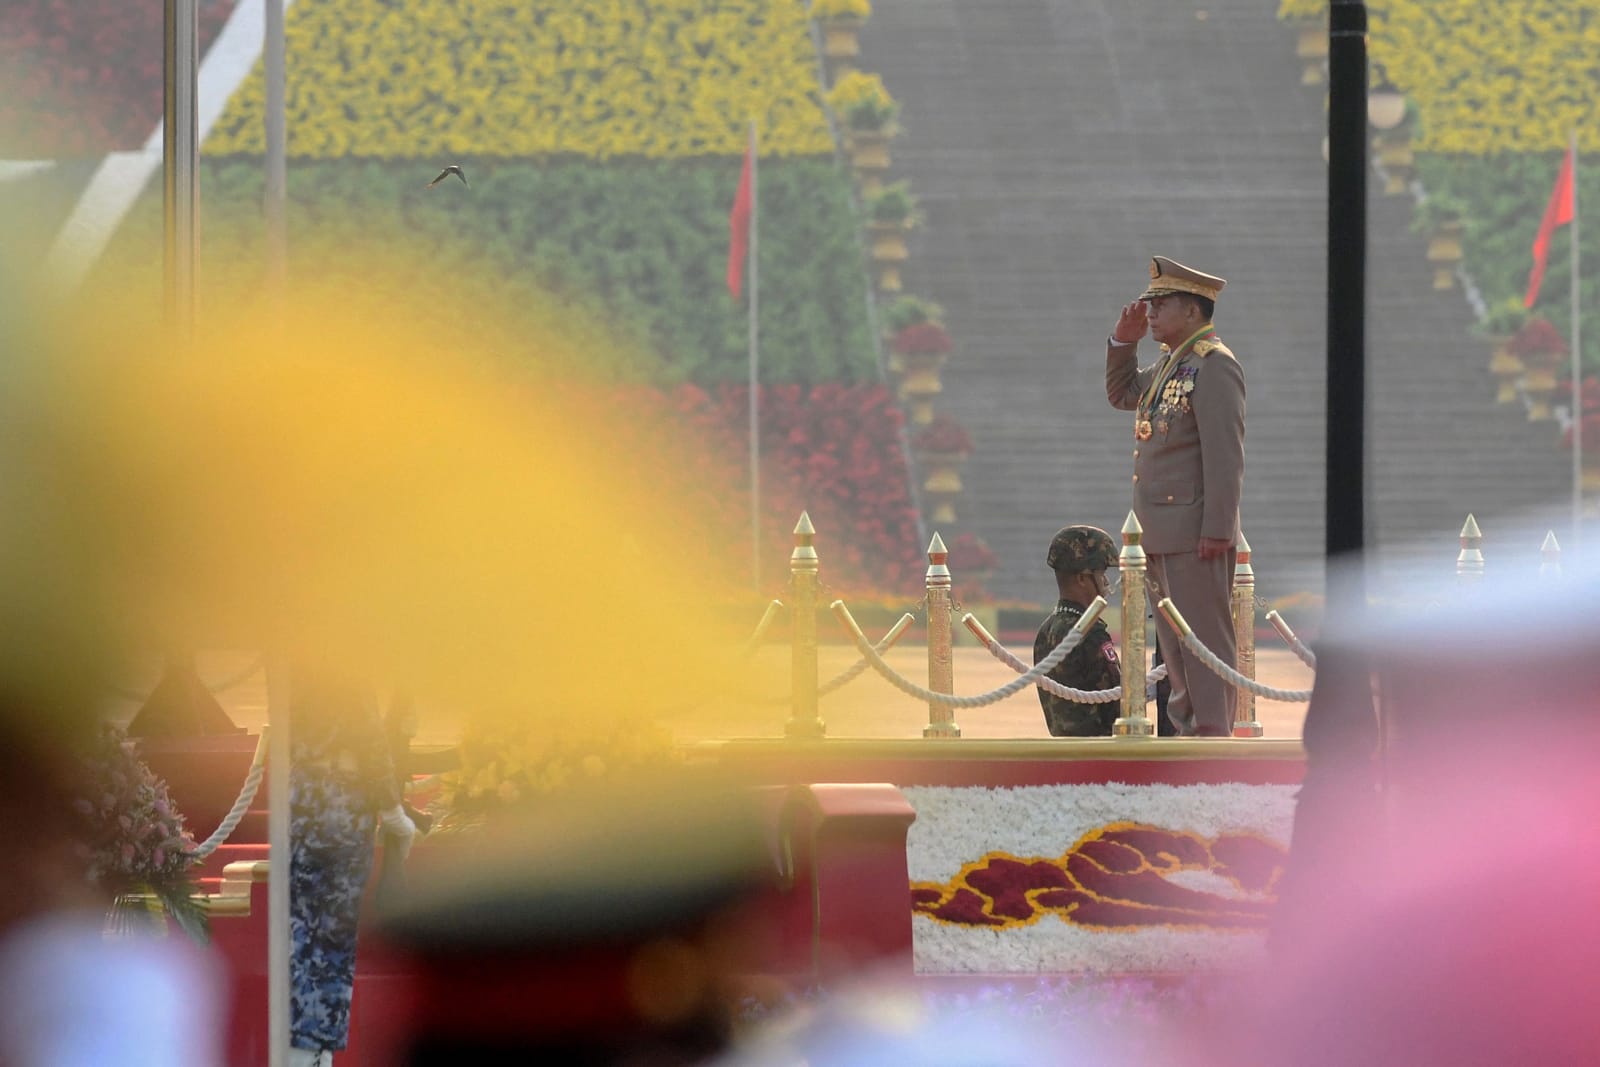 Myanmar Military Chief Senior General Min Aung Hlaing salutes during a ceremony to mark the country’s 78th Armed Forces Day in Naypyidaw last month (STR/AFP via Getty Images)